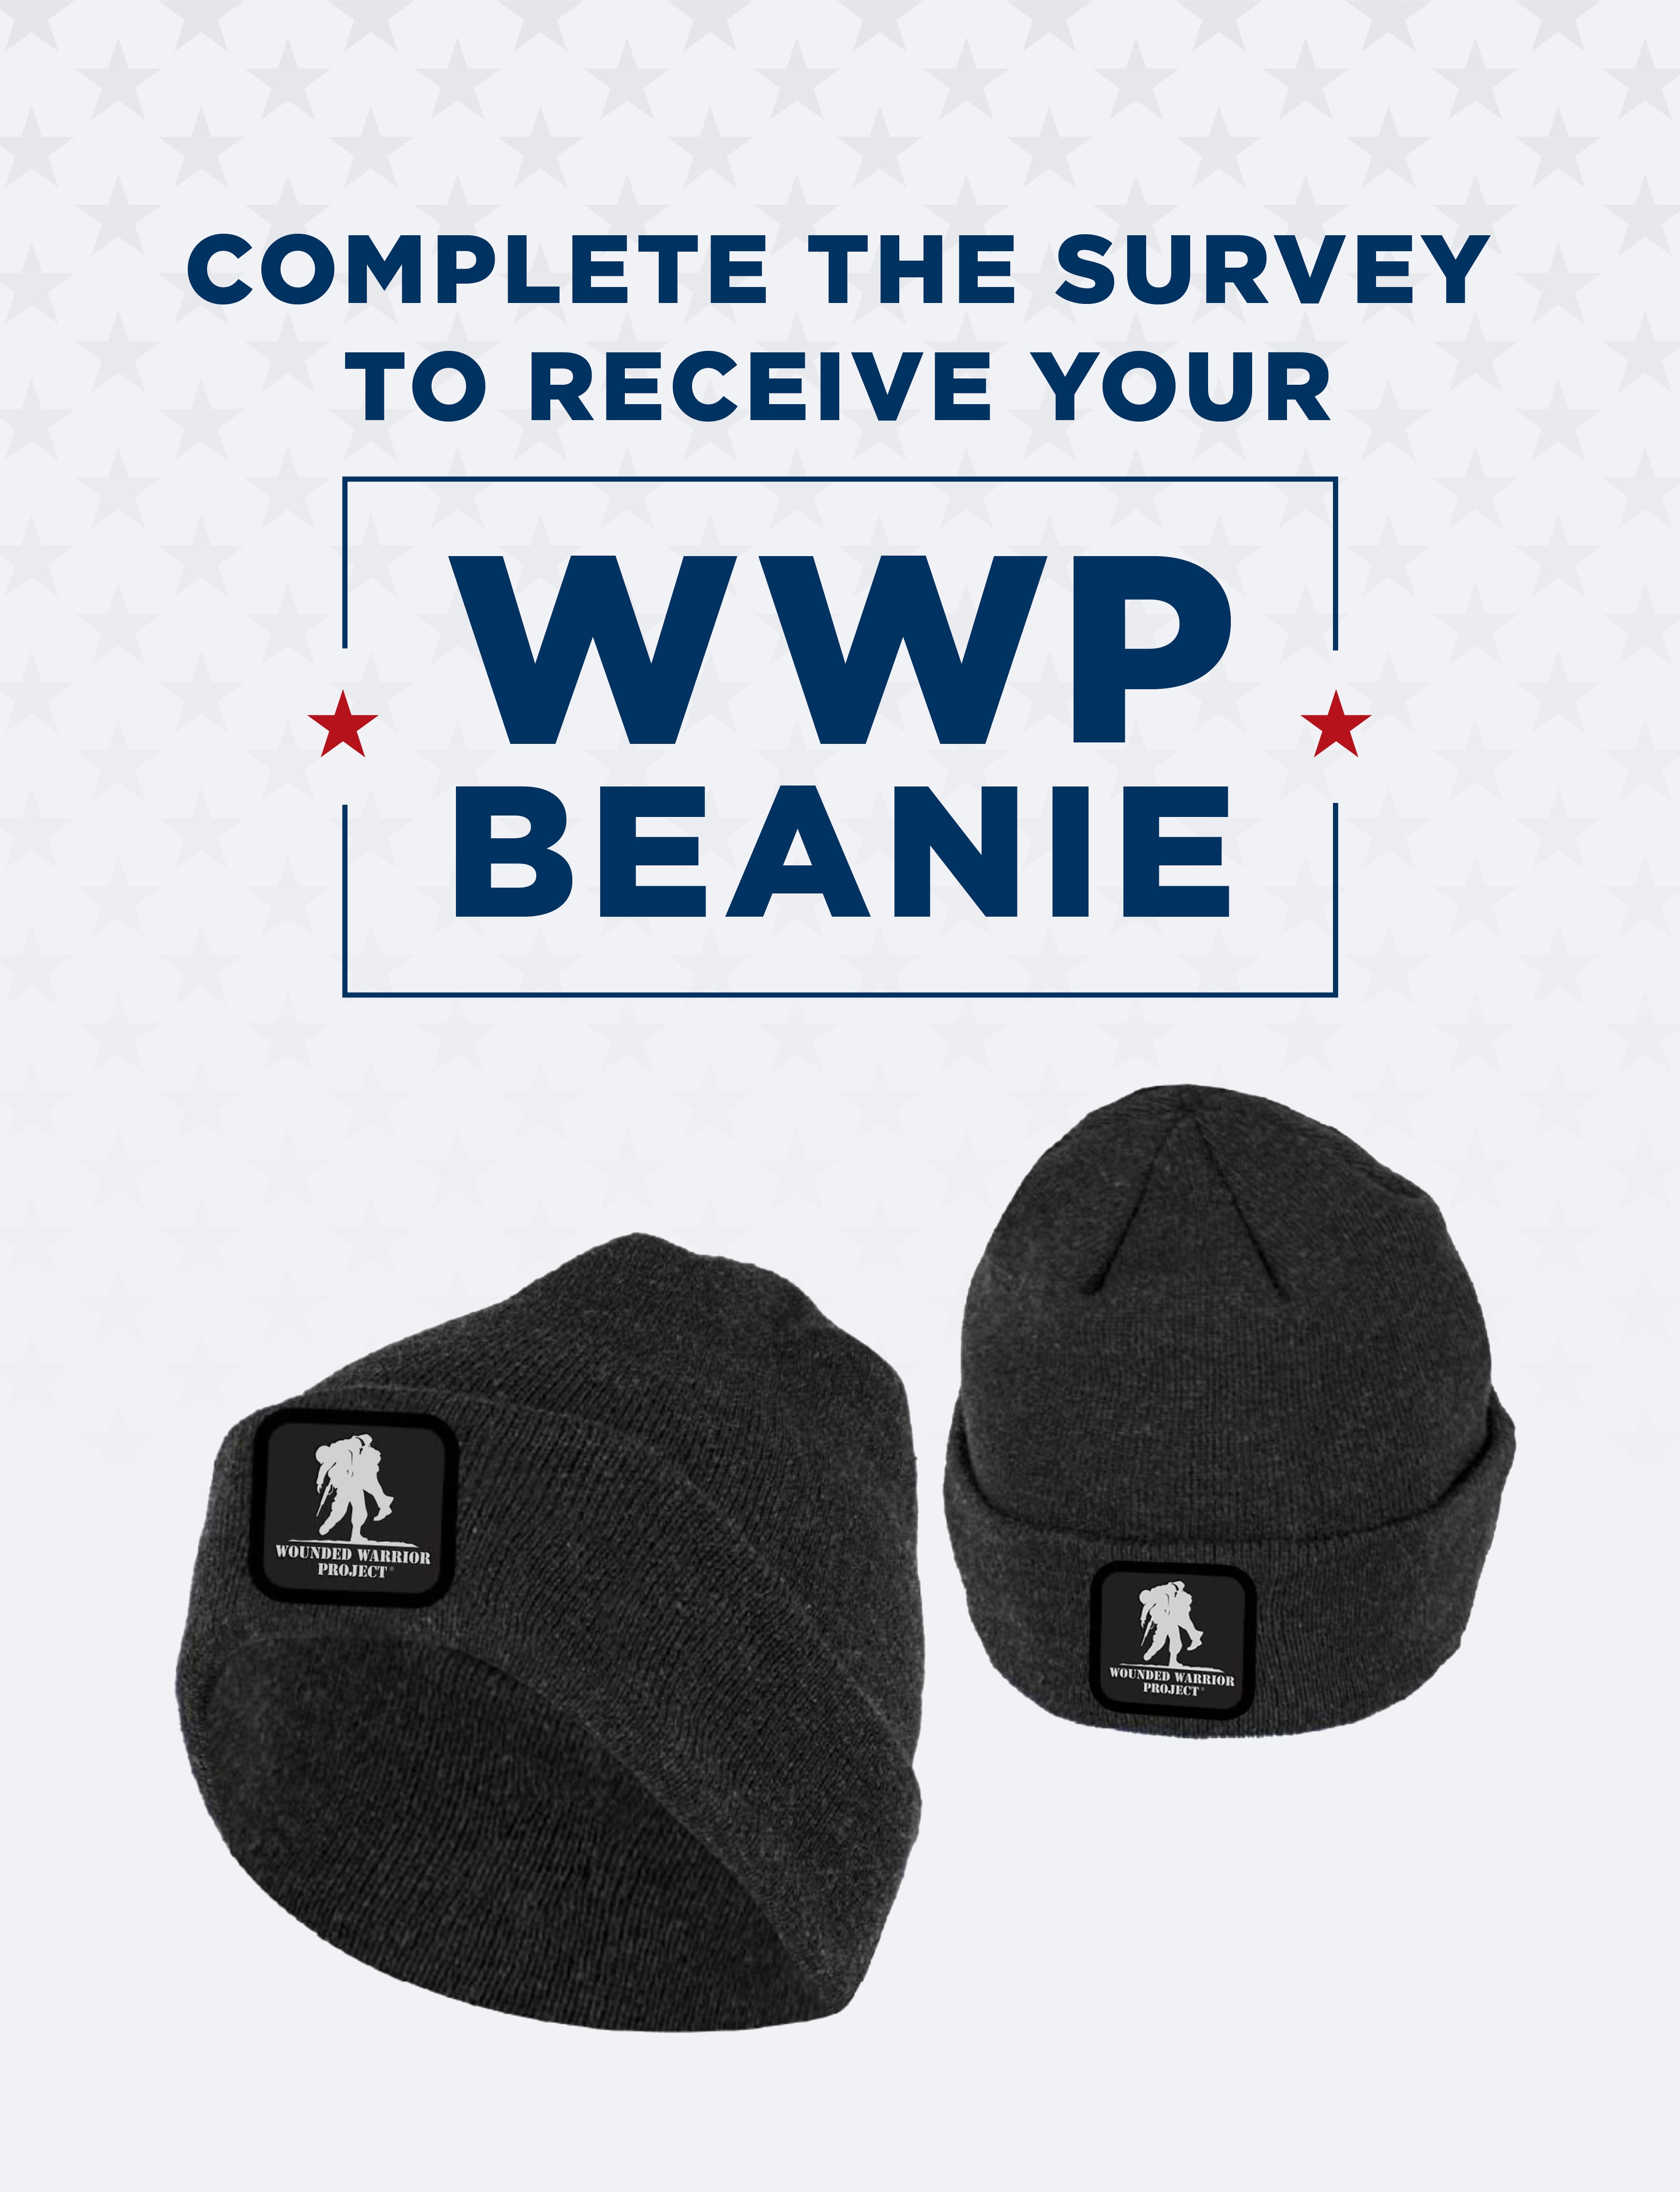 Complete the survey to receive your WWP beanie